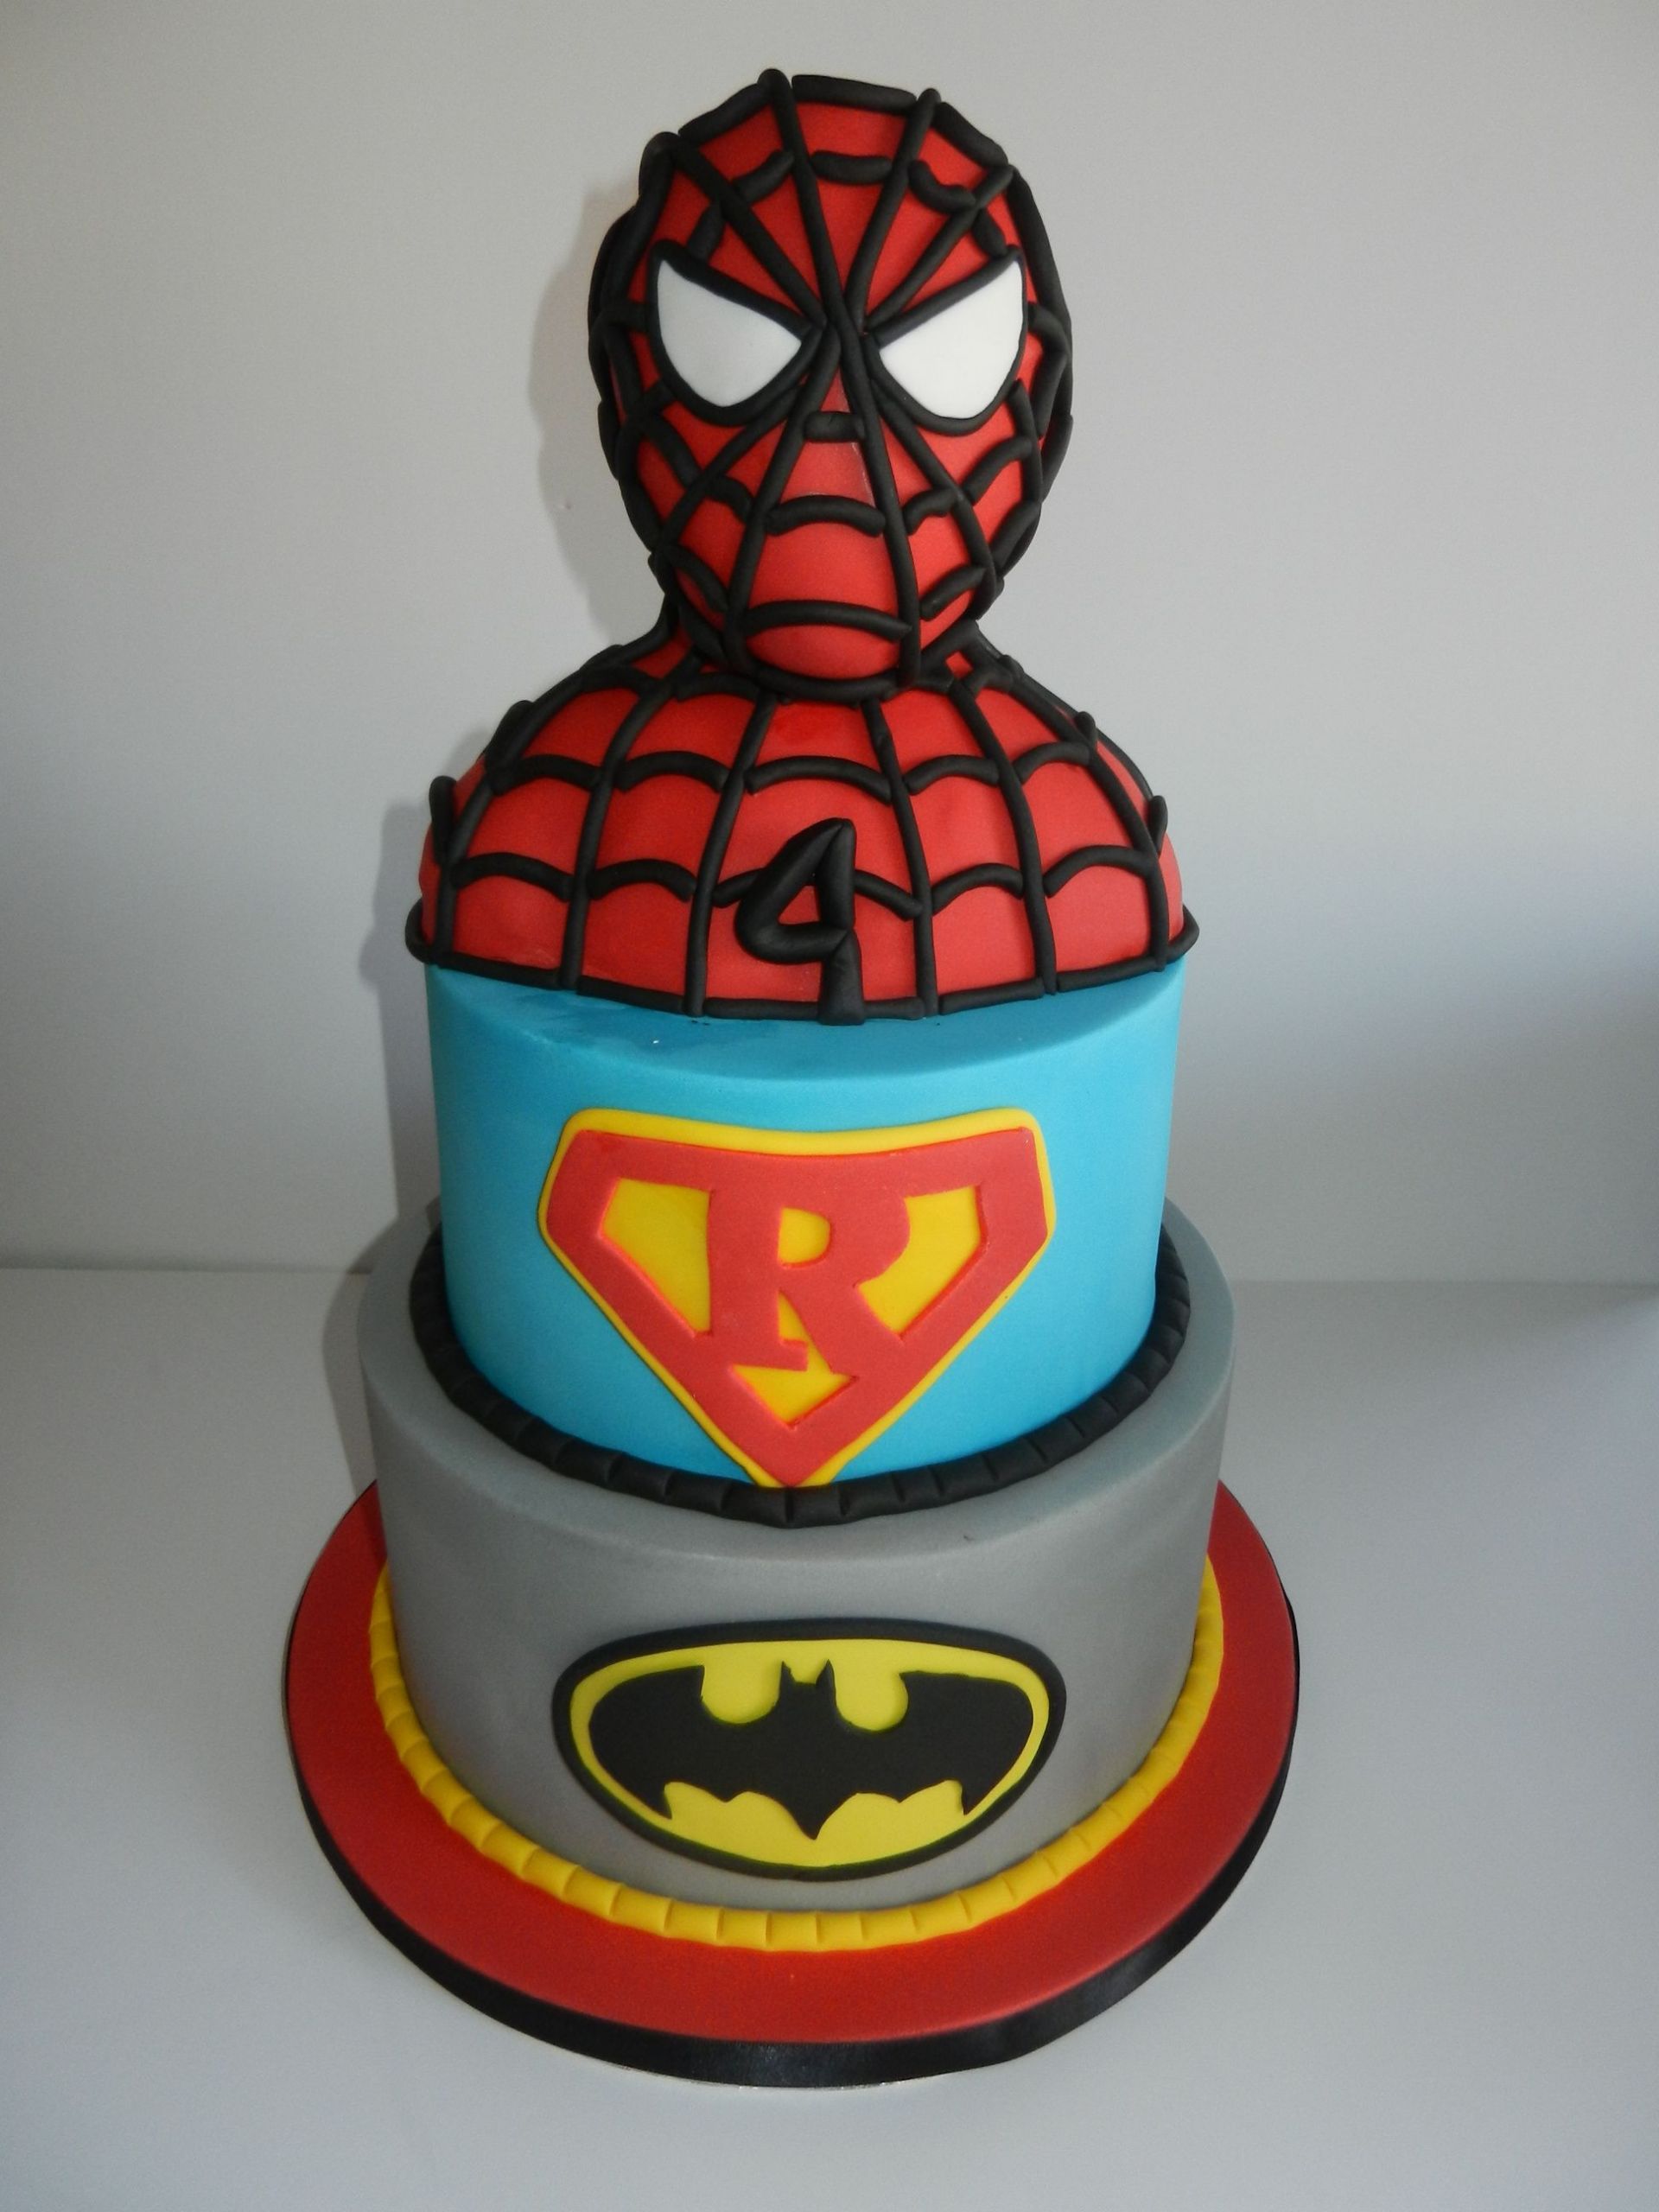 Batman Birthday Party Ideas 4 Year Old
 This Super Hero Cake was for a Super 4 Year old Birthday